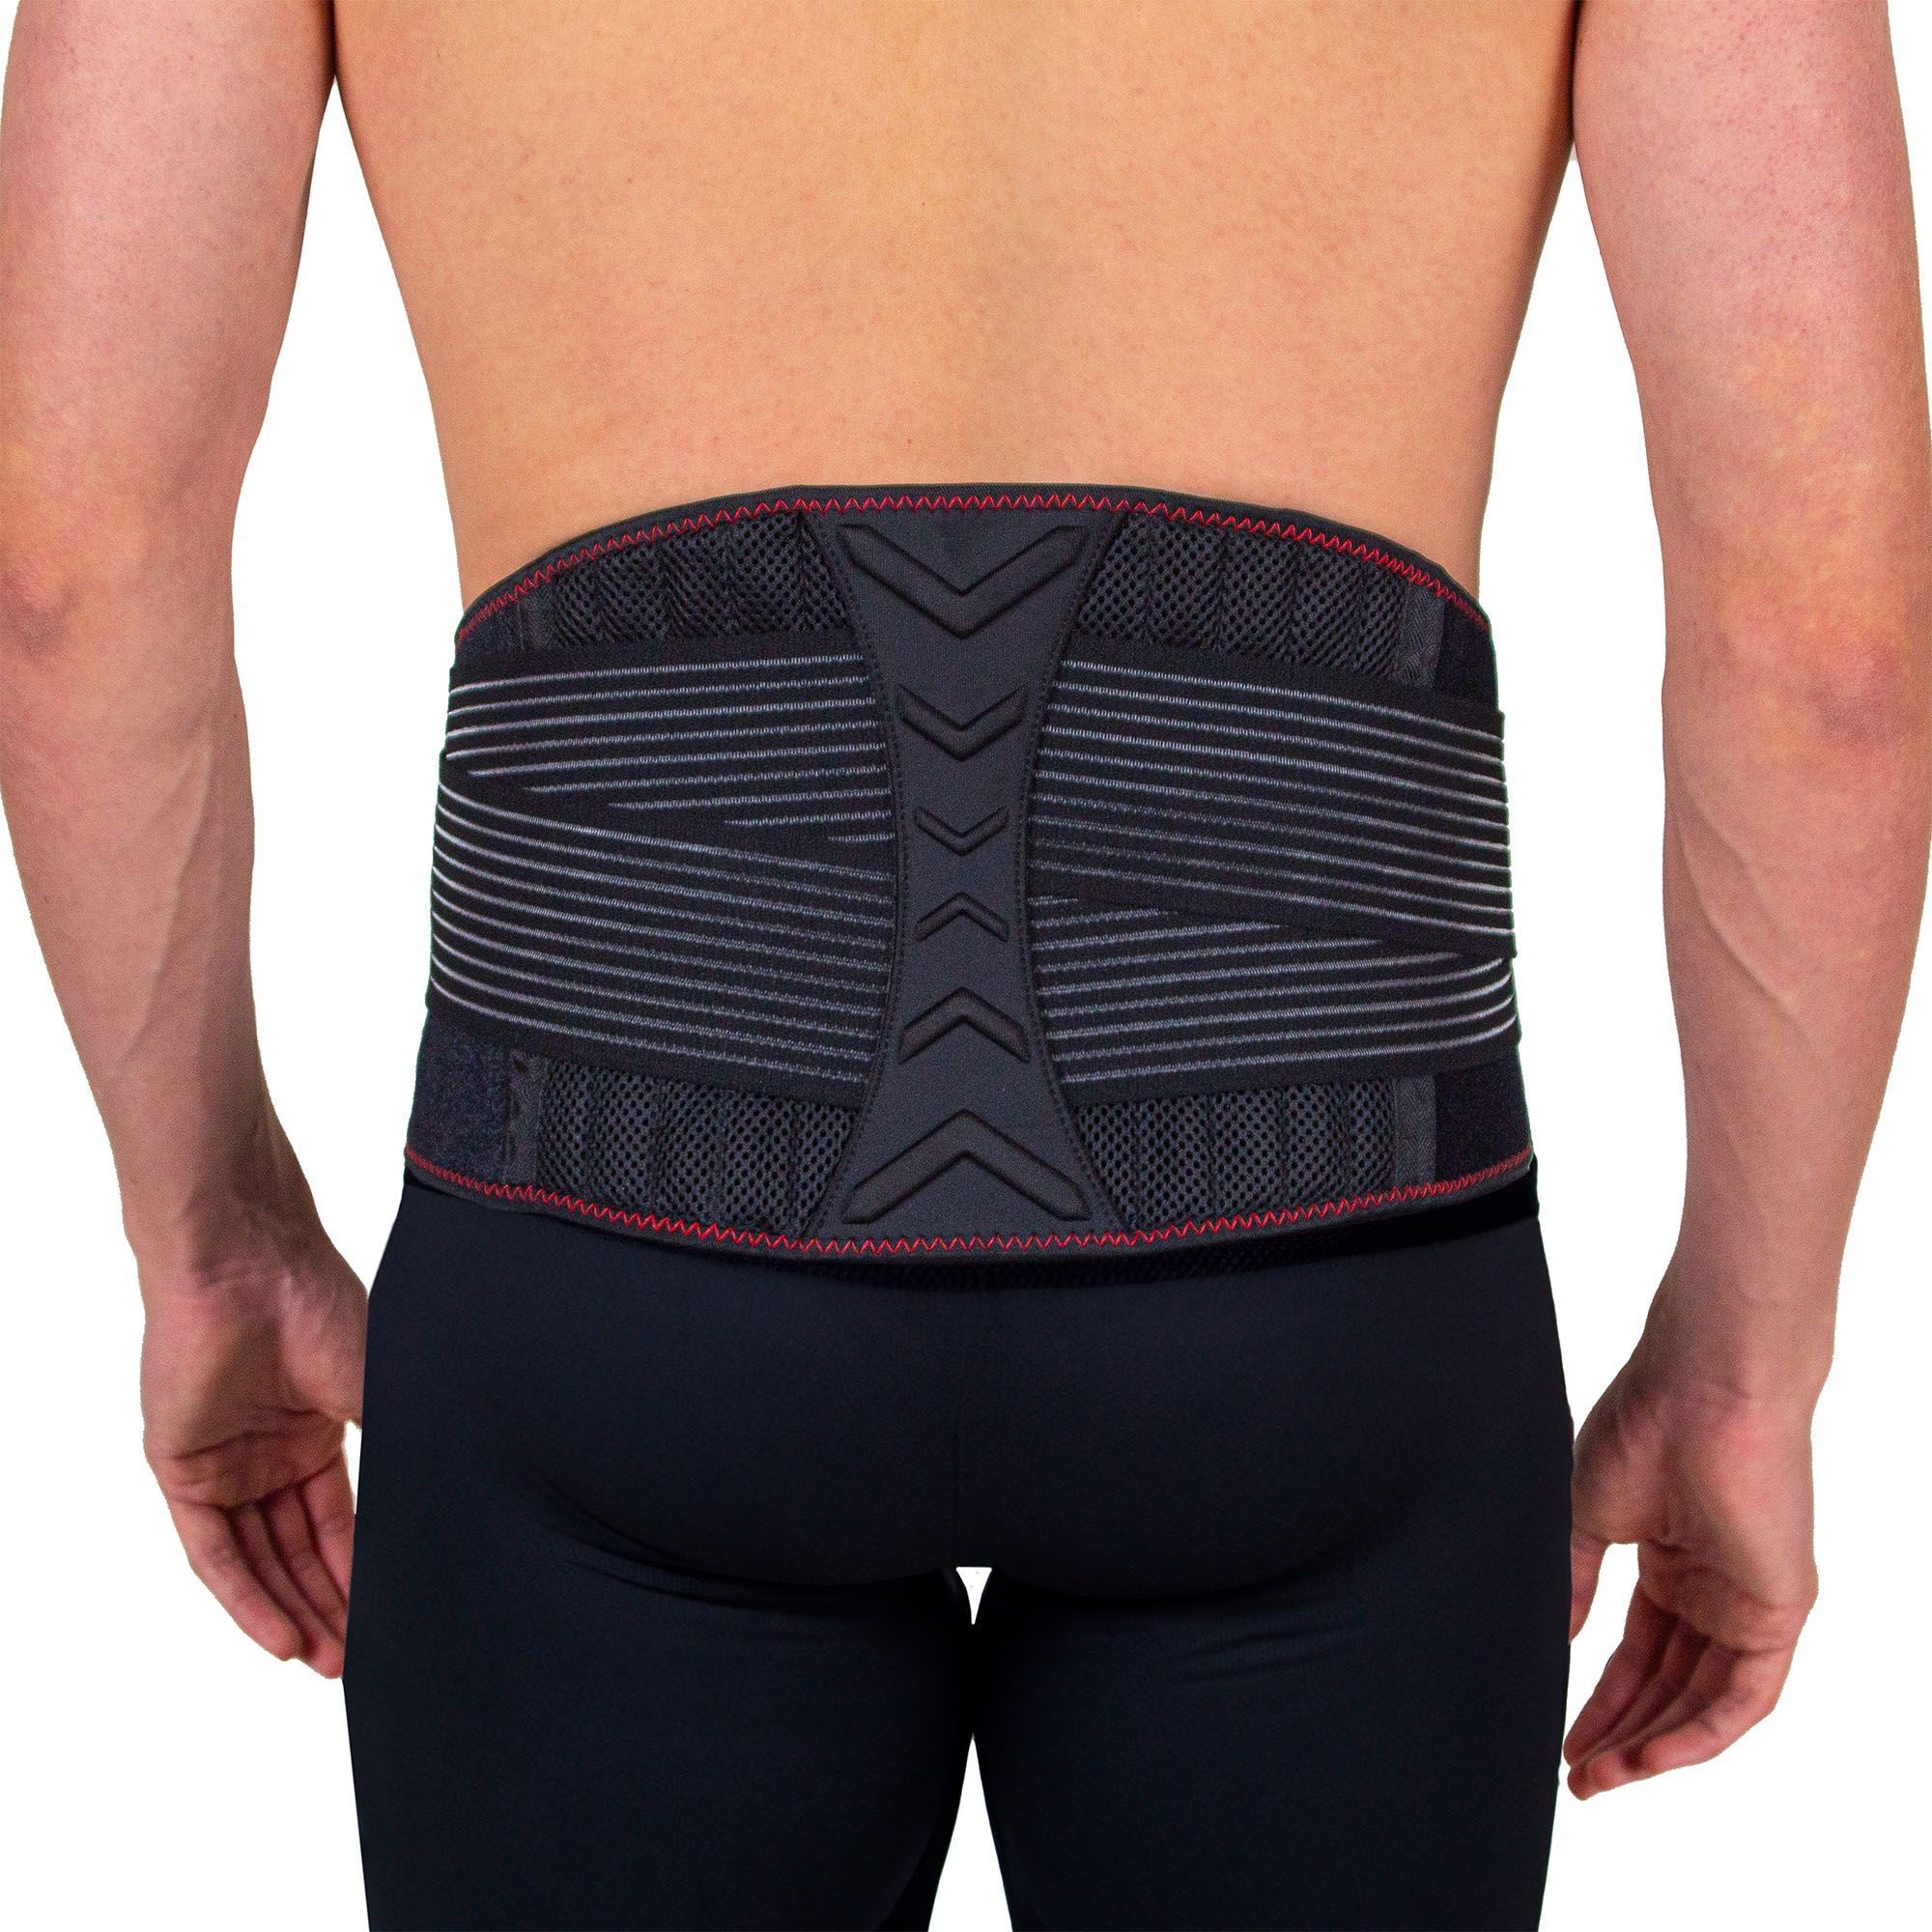 Gladiator sports back support worn by model back view